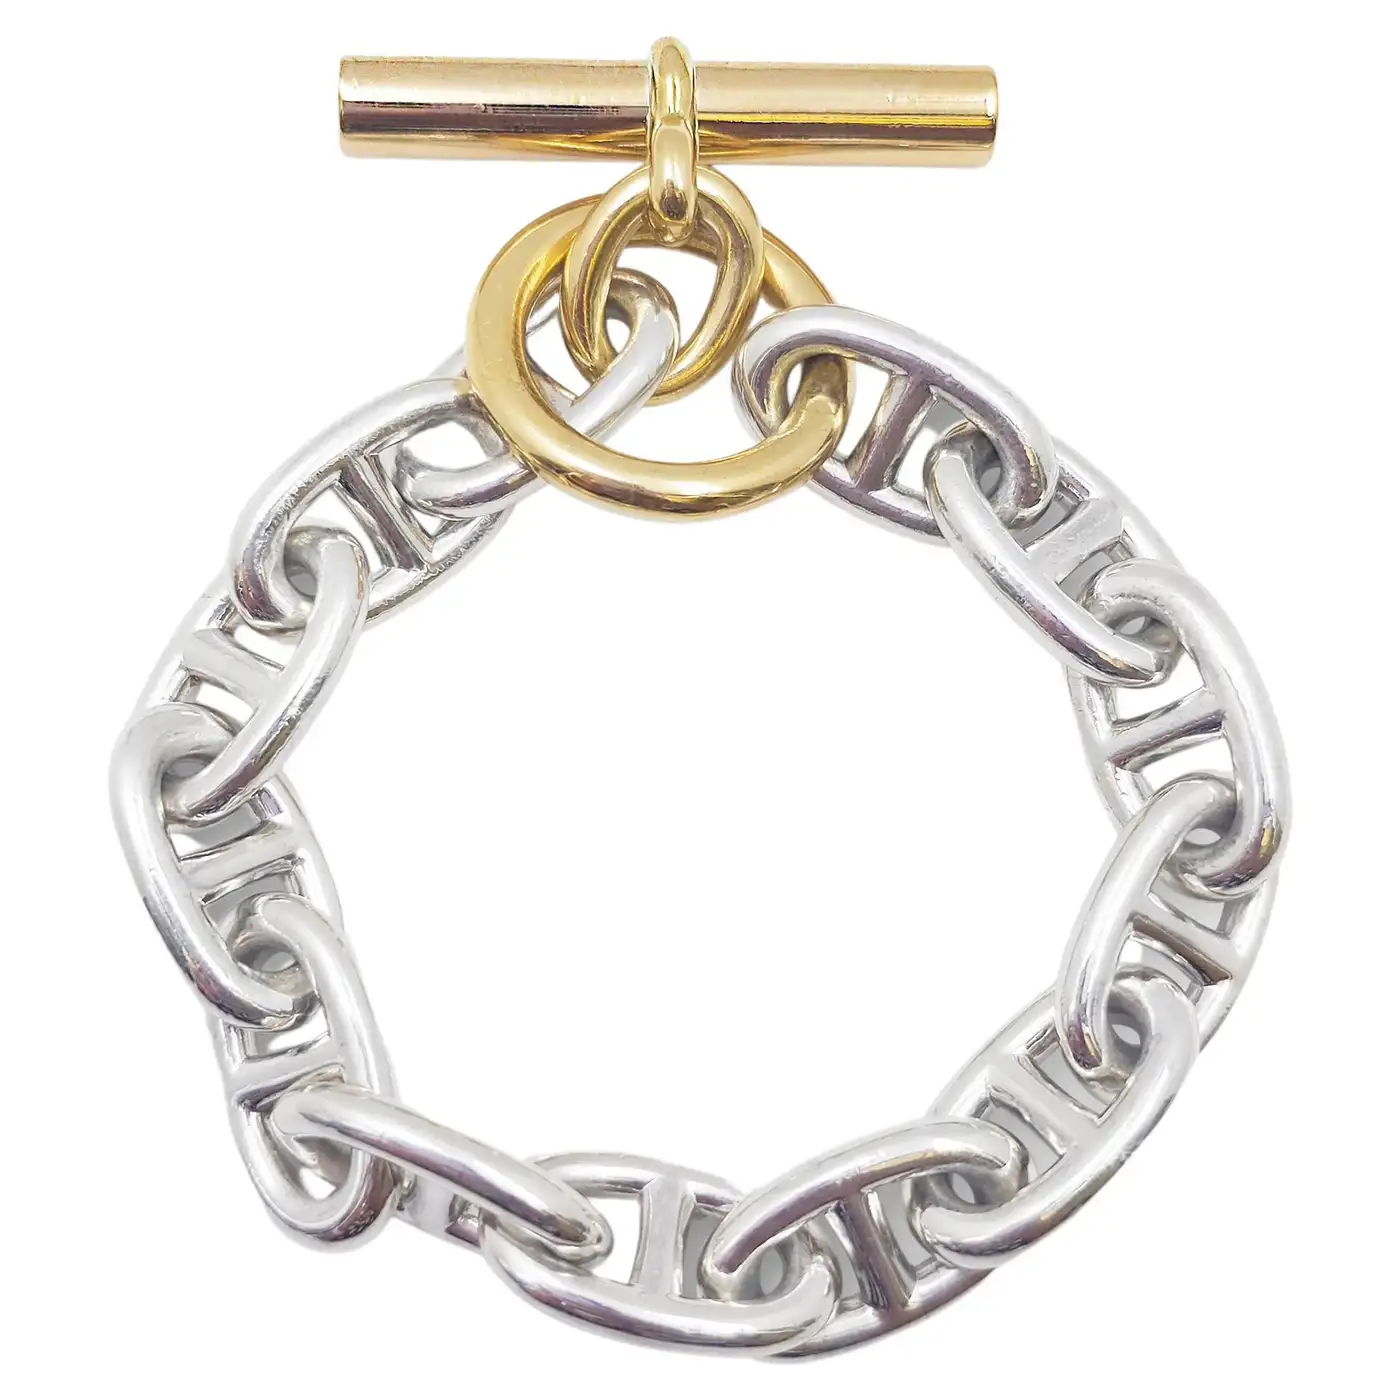 Hermes-Chaine-dAncre-Silver-and-Gold-Bracelet-1.webp